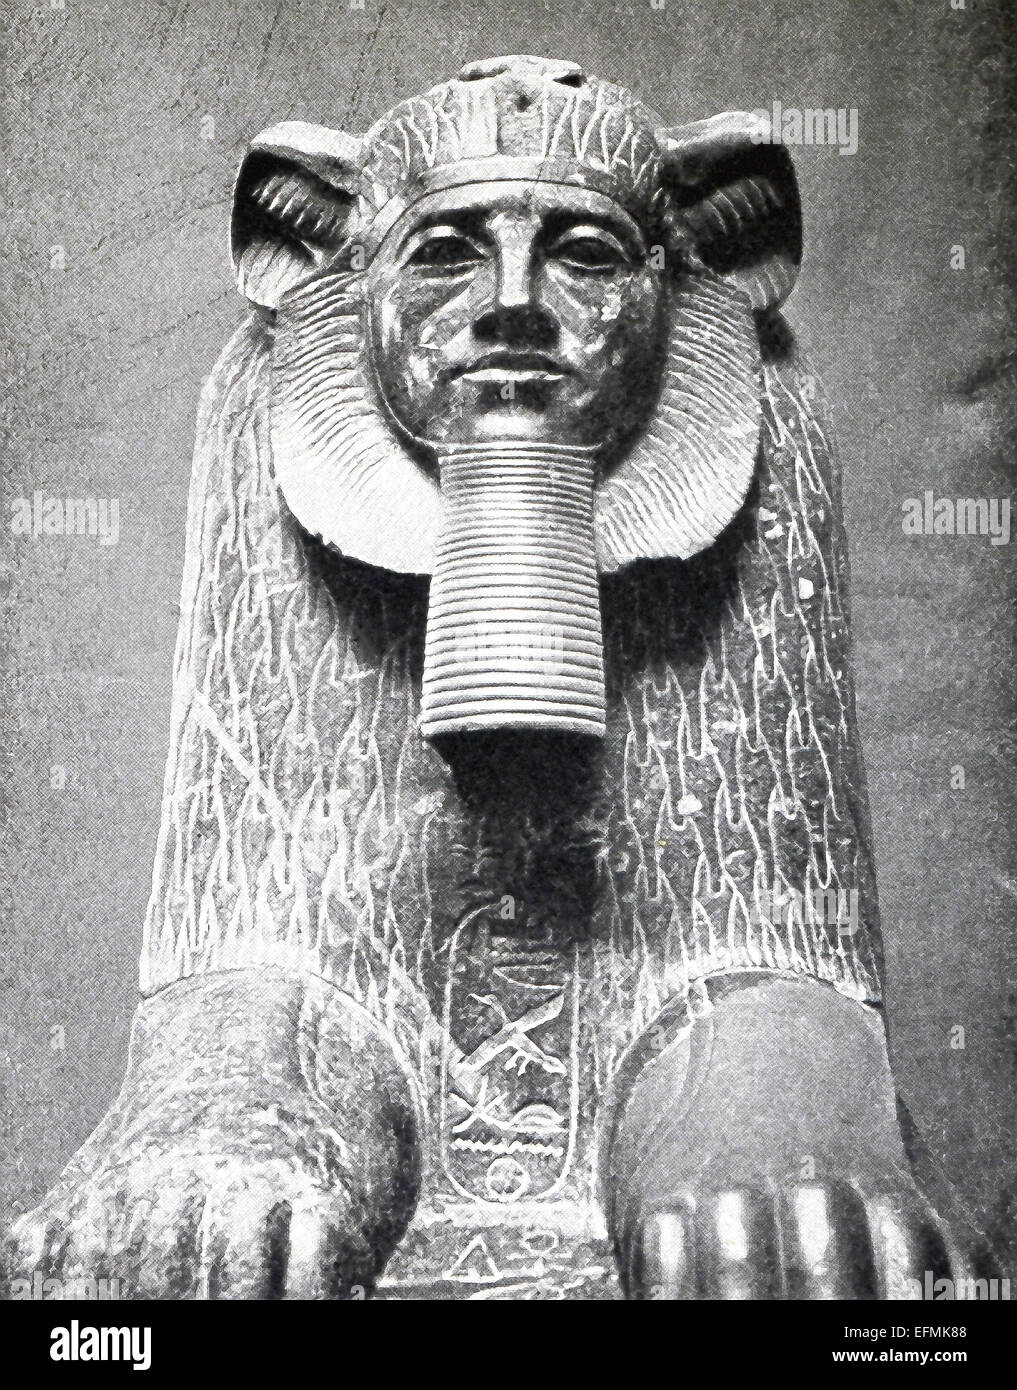 This Hyksos sphinx dates to Egypt's 12th Dynasty (c. 1991-1786 B.C.) and was found in Tanis. The noted French archaeologist Auguste Mariette wrote in 1863 that these black granite sphinxes 'differ from other Egyptian monuments in a very marked way as one sees by comparing them with the Sphinx of Tutmes III and Ramses II. The face is round, the eyes are small, the nose flattened, the cheek bones projecting, the lower lip slightly advanced, the ears are those of a bull while the mane of a lion encircles the visage.' Stock Photo